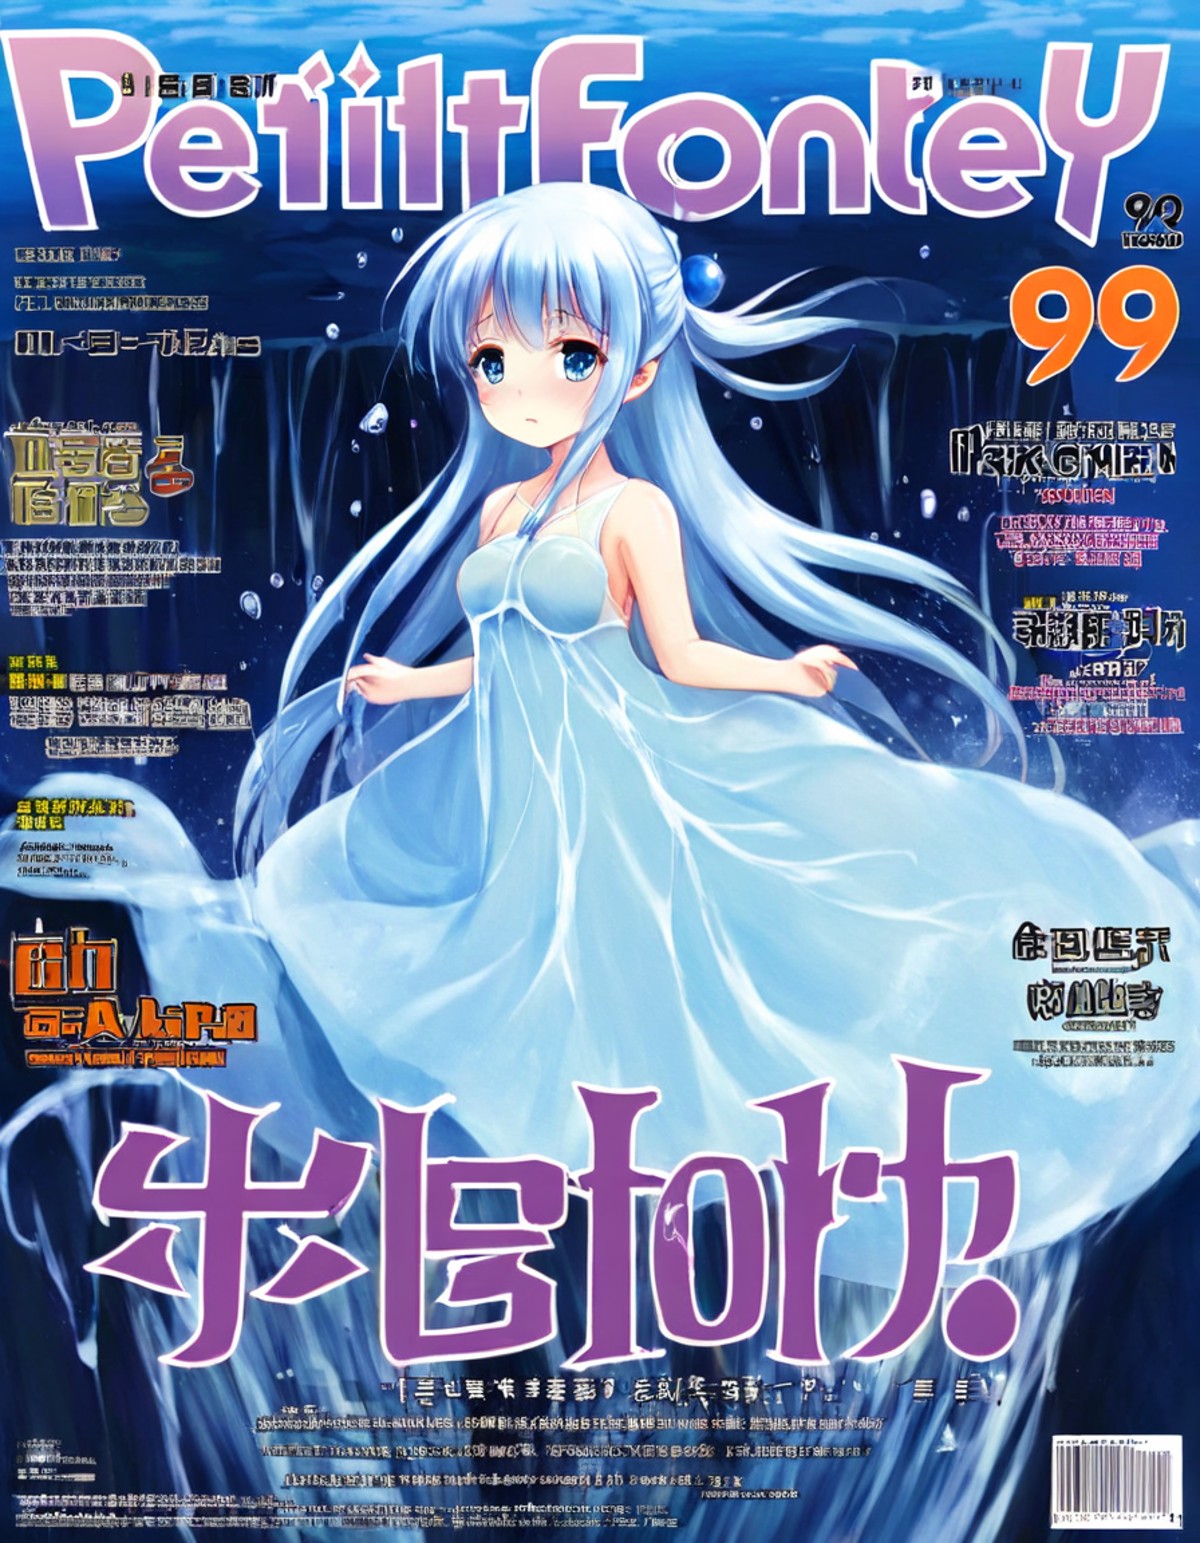 Design the cover of an anime magazine titled 'FancyFrontier,' issue number 99. The cover features the protagonist of 'Wate...